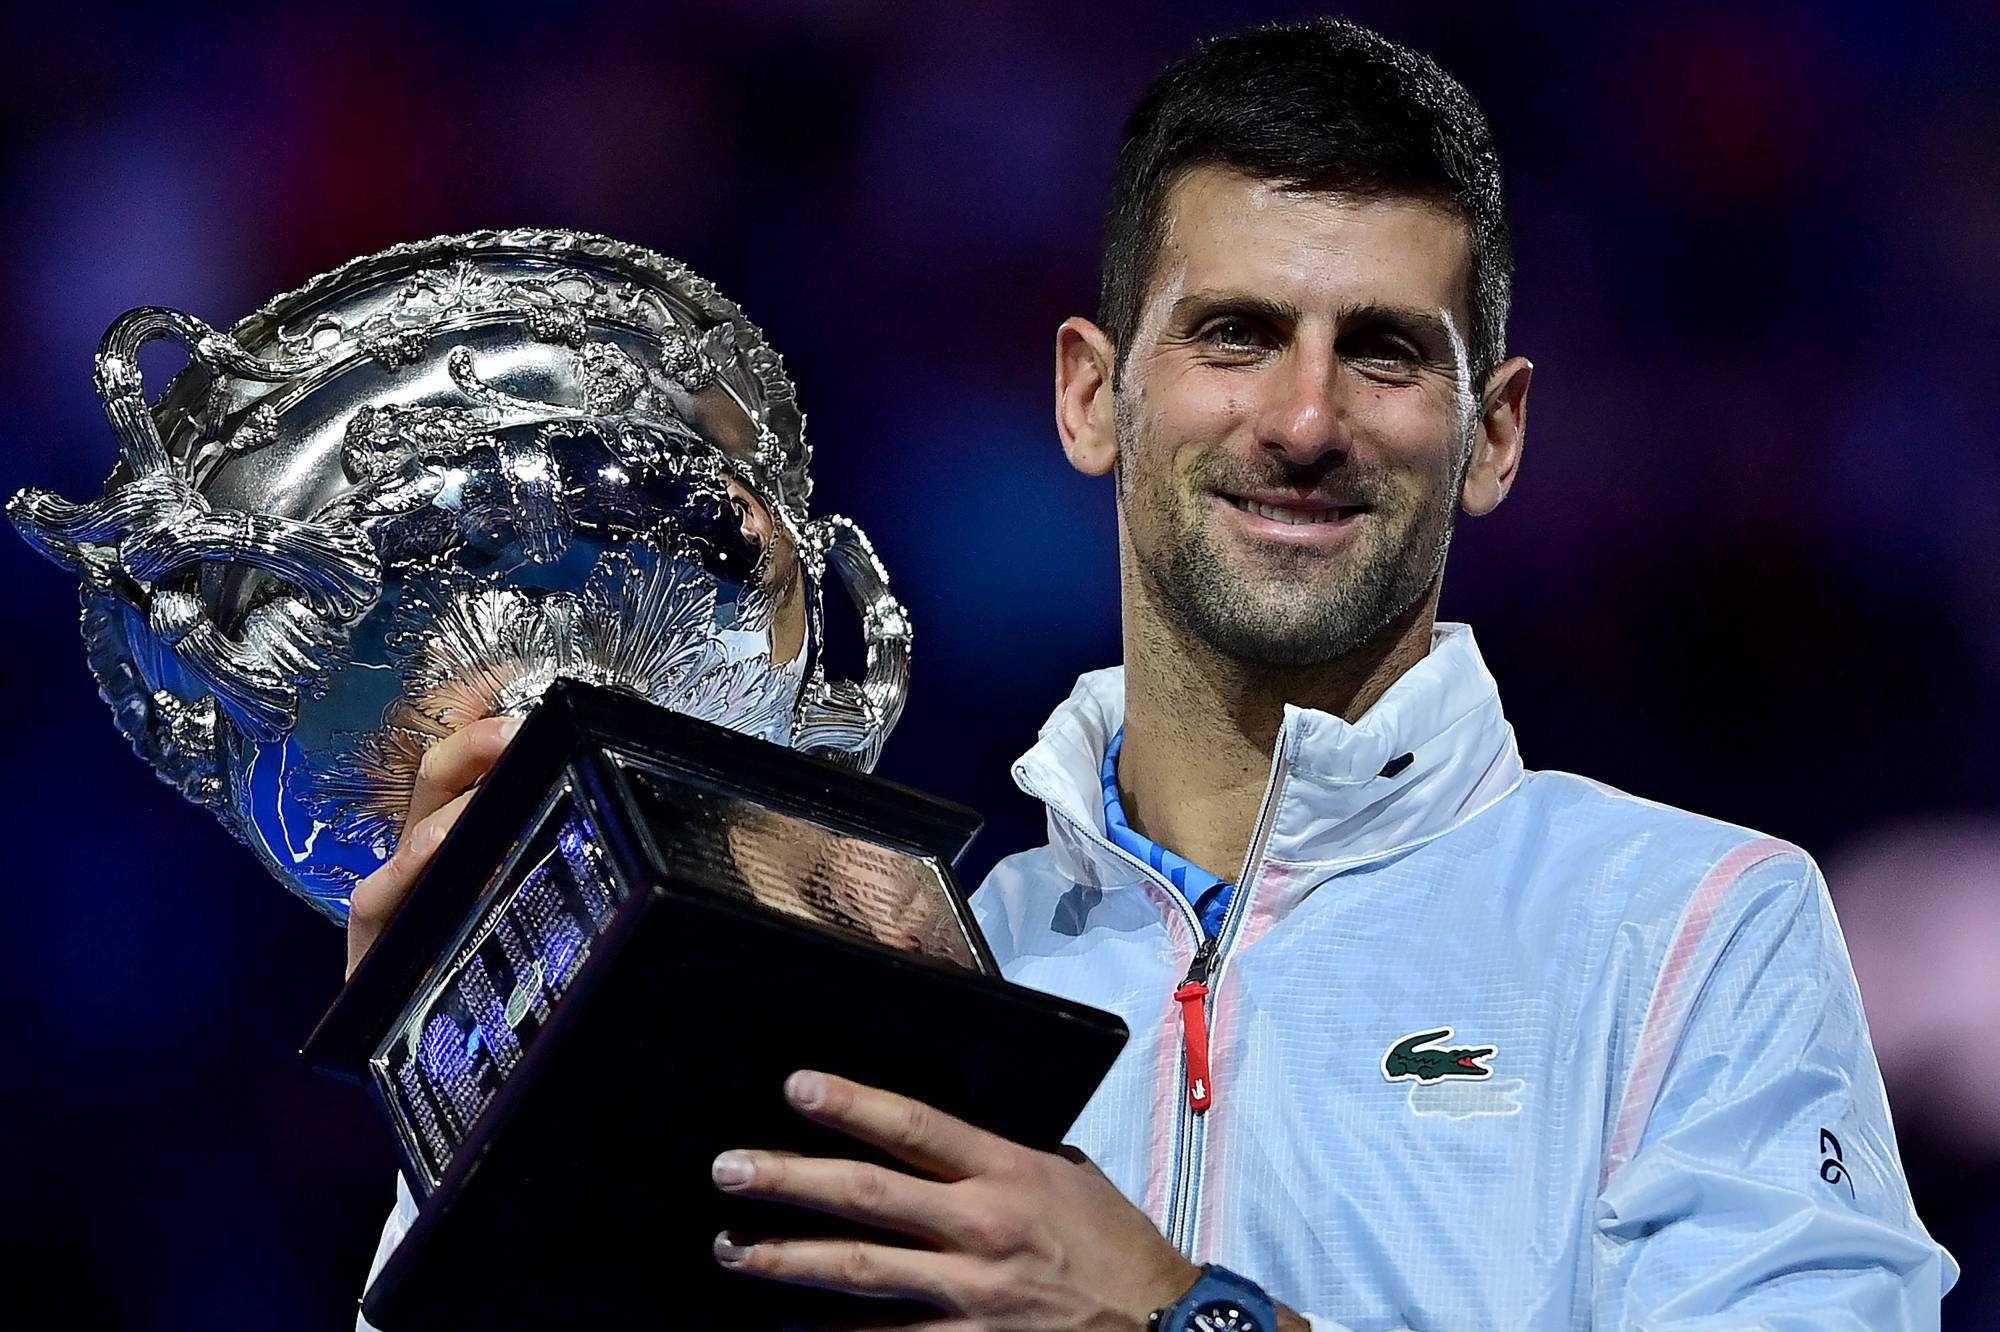 Novak Djokovic injury: "He played with a 3cm tear", Australian Open chief Craig Tiley reveals extent of Novak Djokovic's injury after his Grand Slam win - Check Out